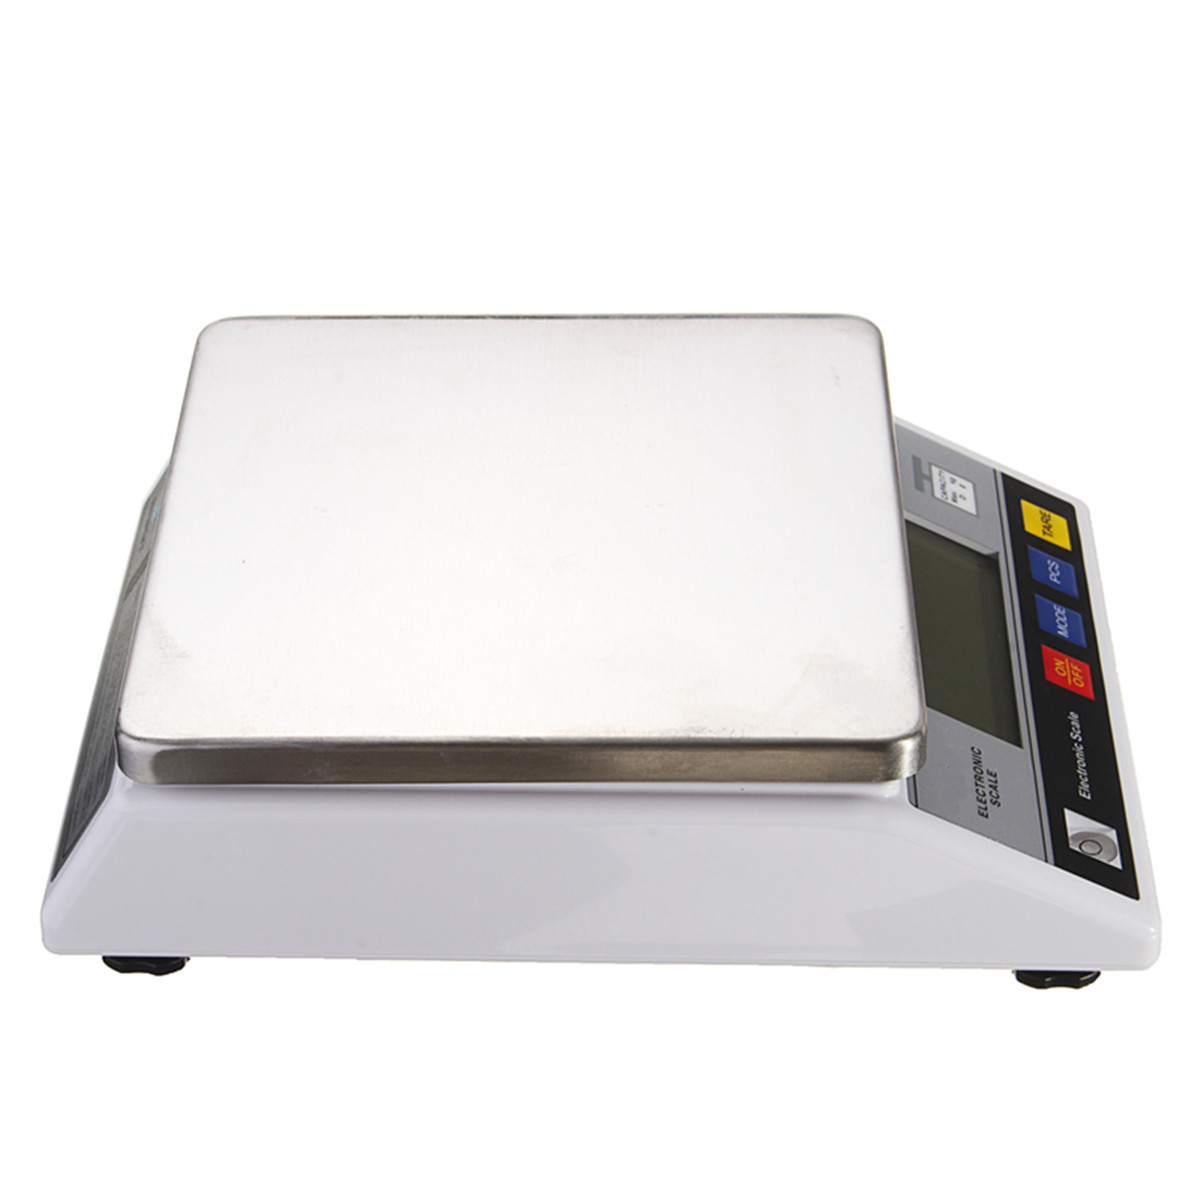 7.5kg x 0.1g LCD Precision Scale Gram Electronic Laboratory Balance Industrial Weighing Scale Kitchen Digital Scale Cooking Tool